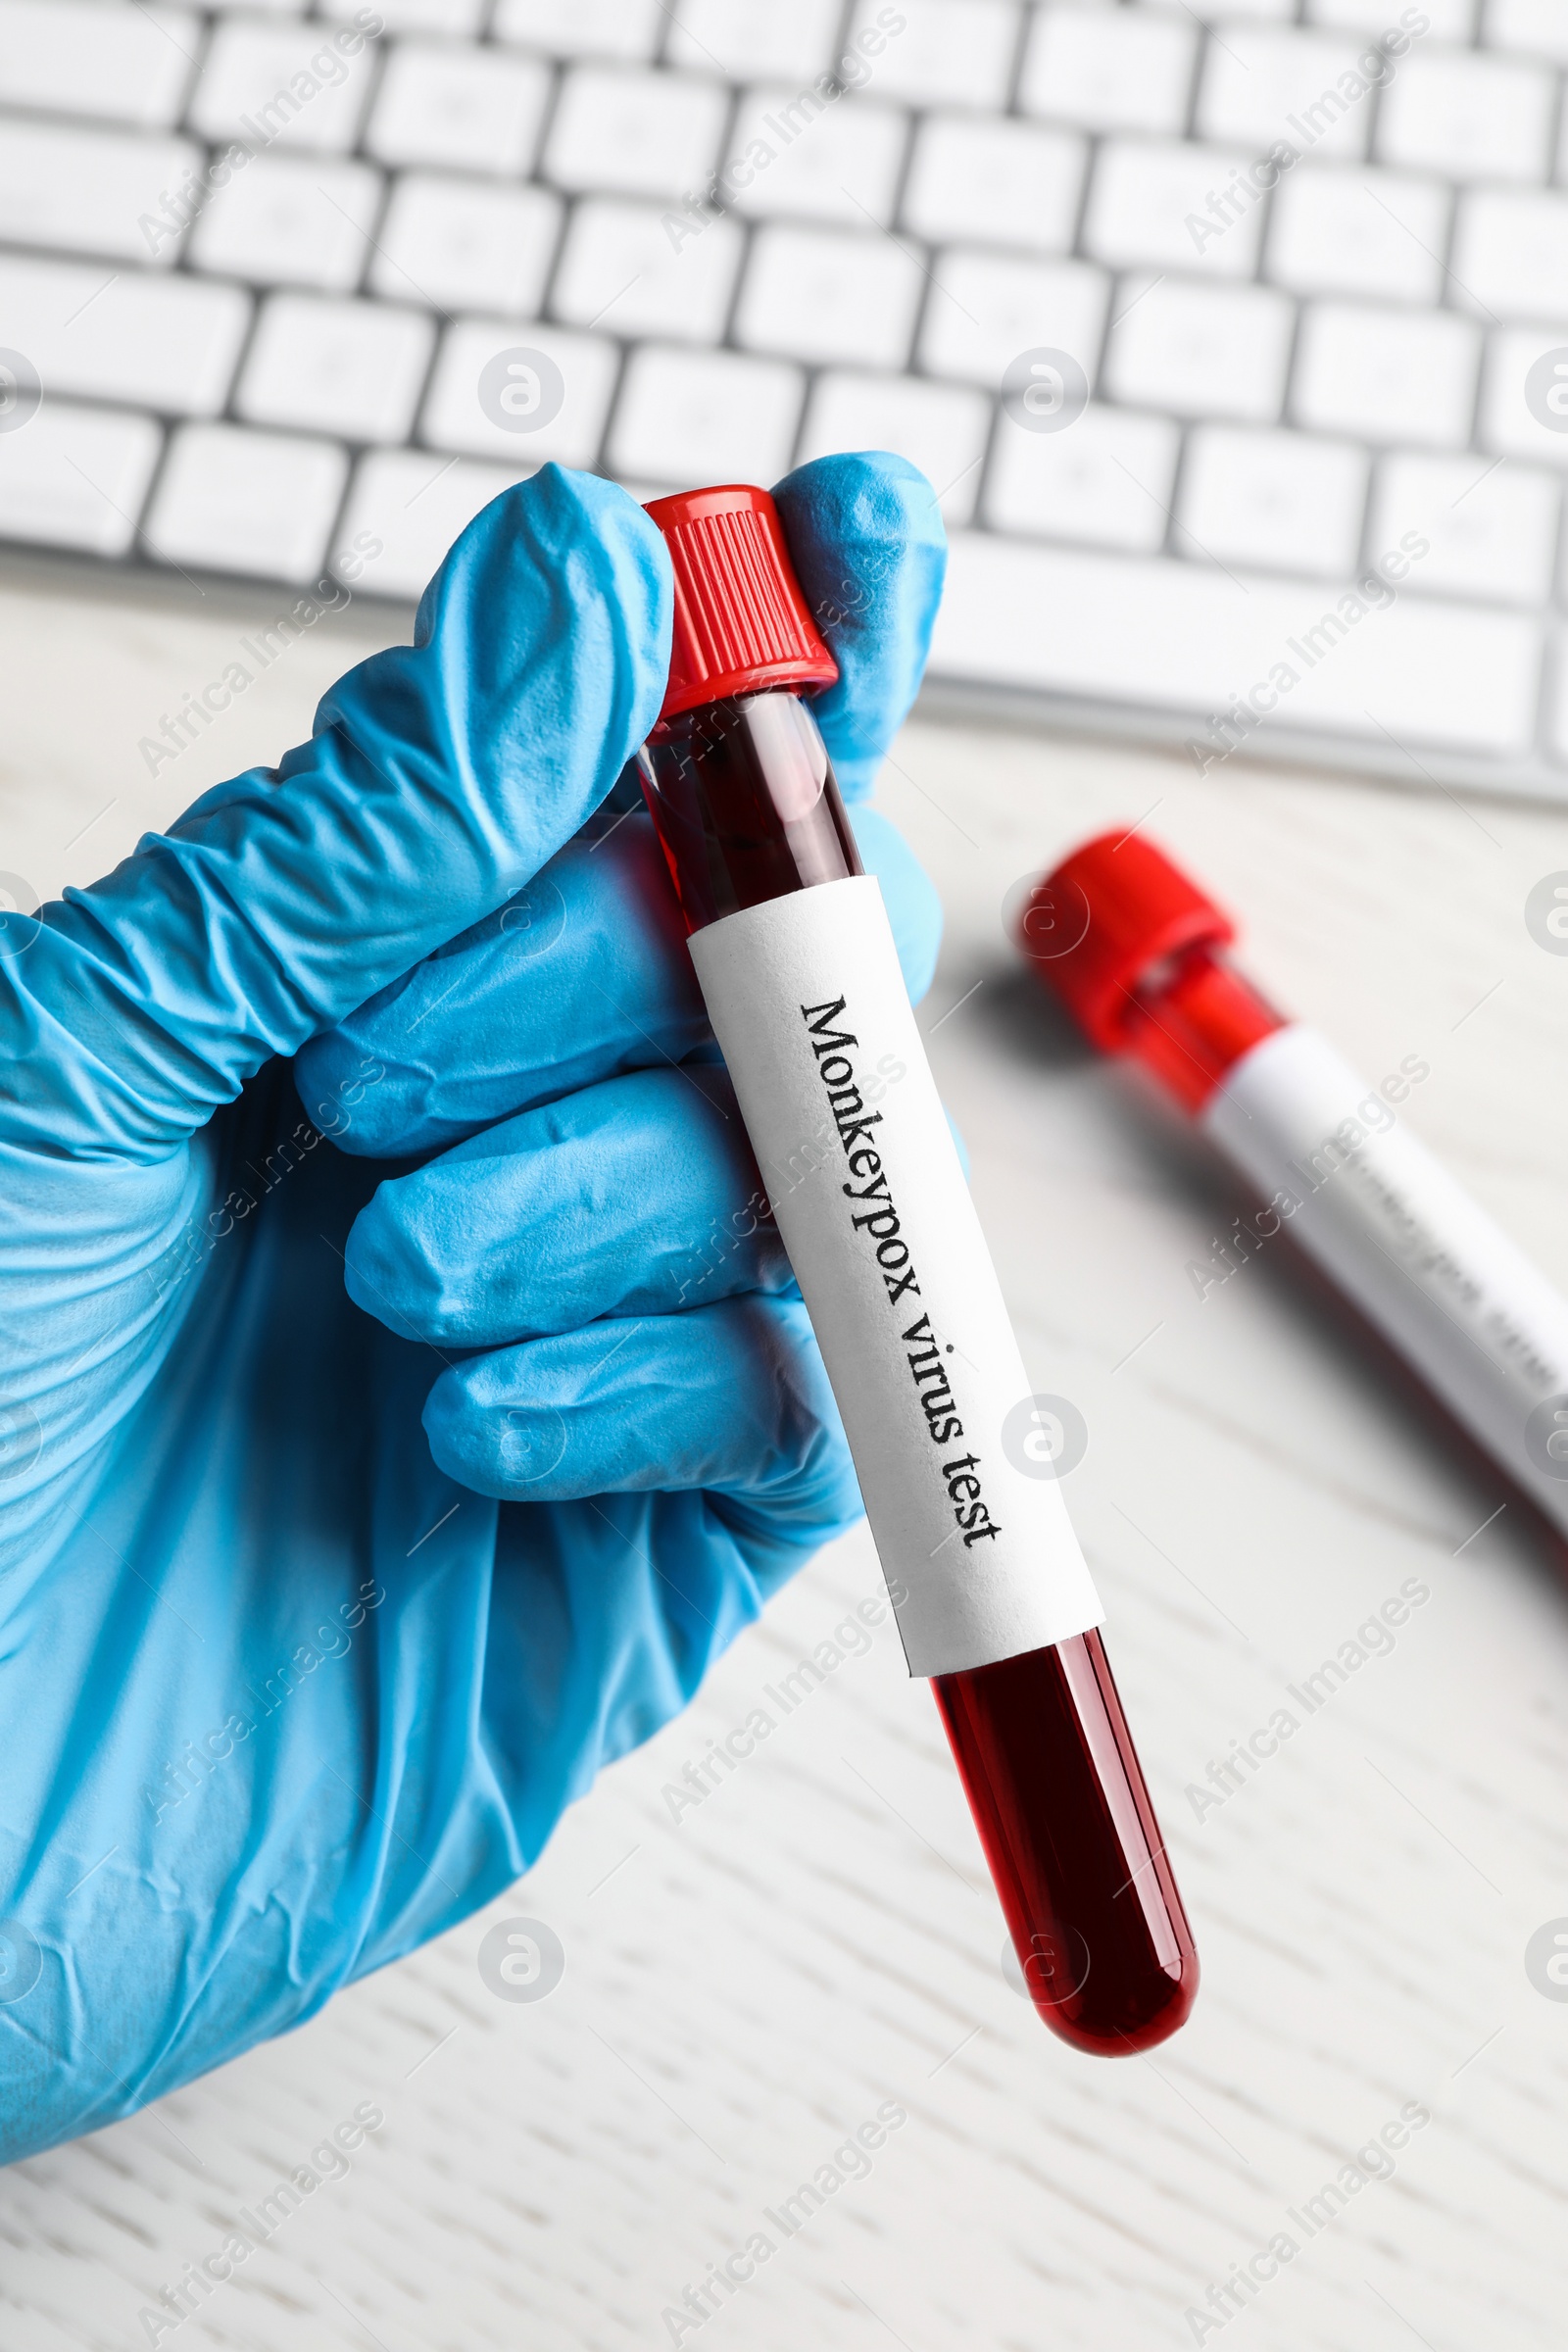 Photo of Monkeypox virus test. Laboratory worker holding sample tube with blood over table, closeup